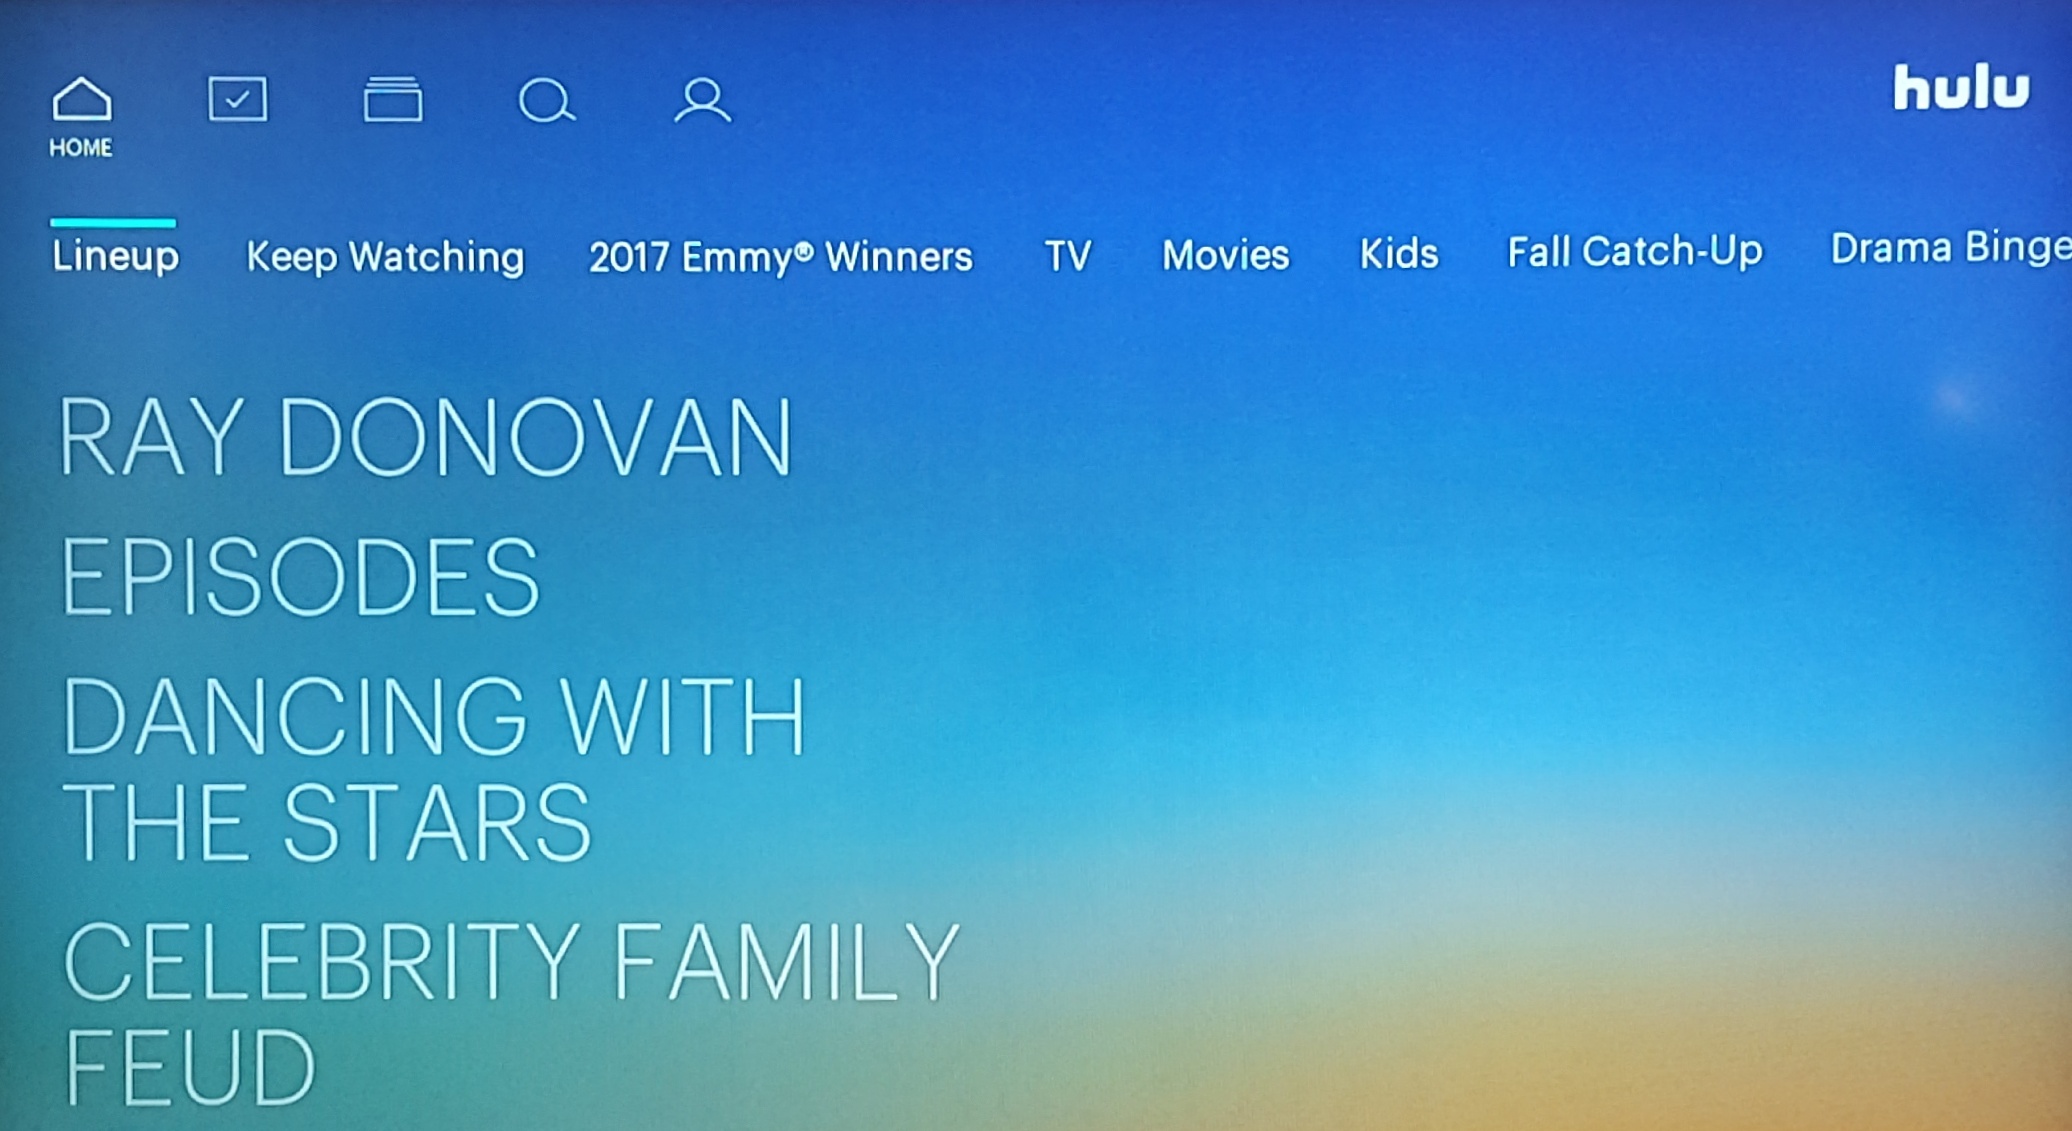 Hulu's new app interface on Roku gone wrong and how to fix it